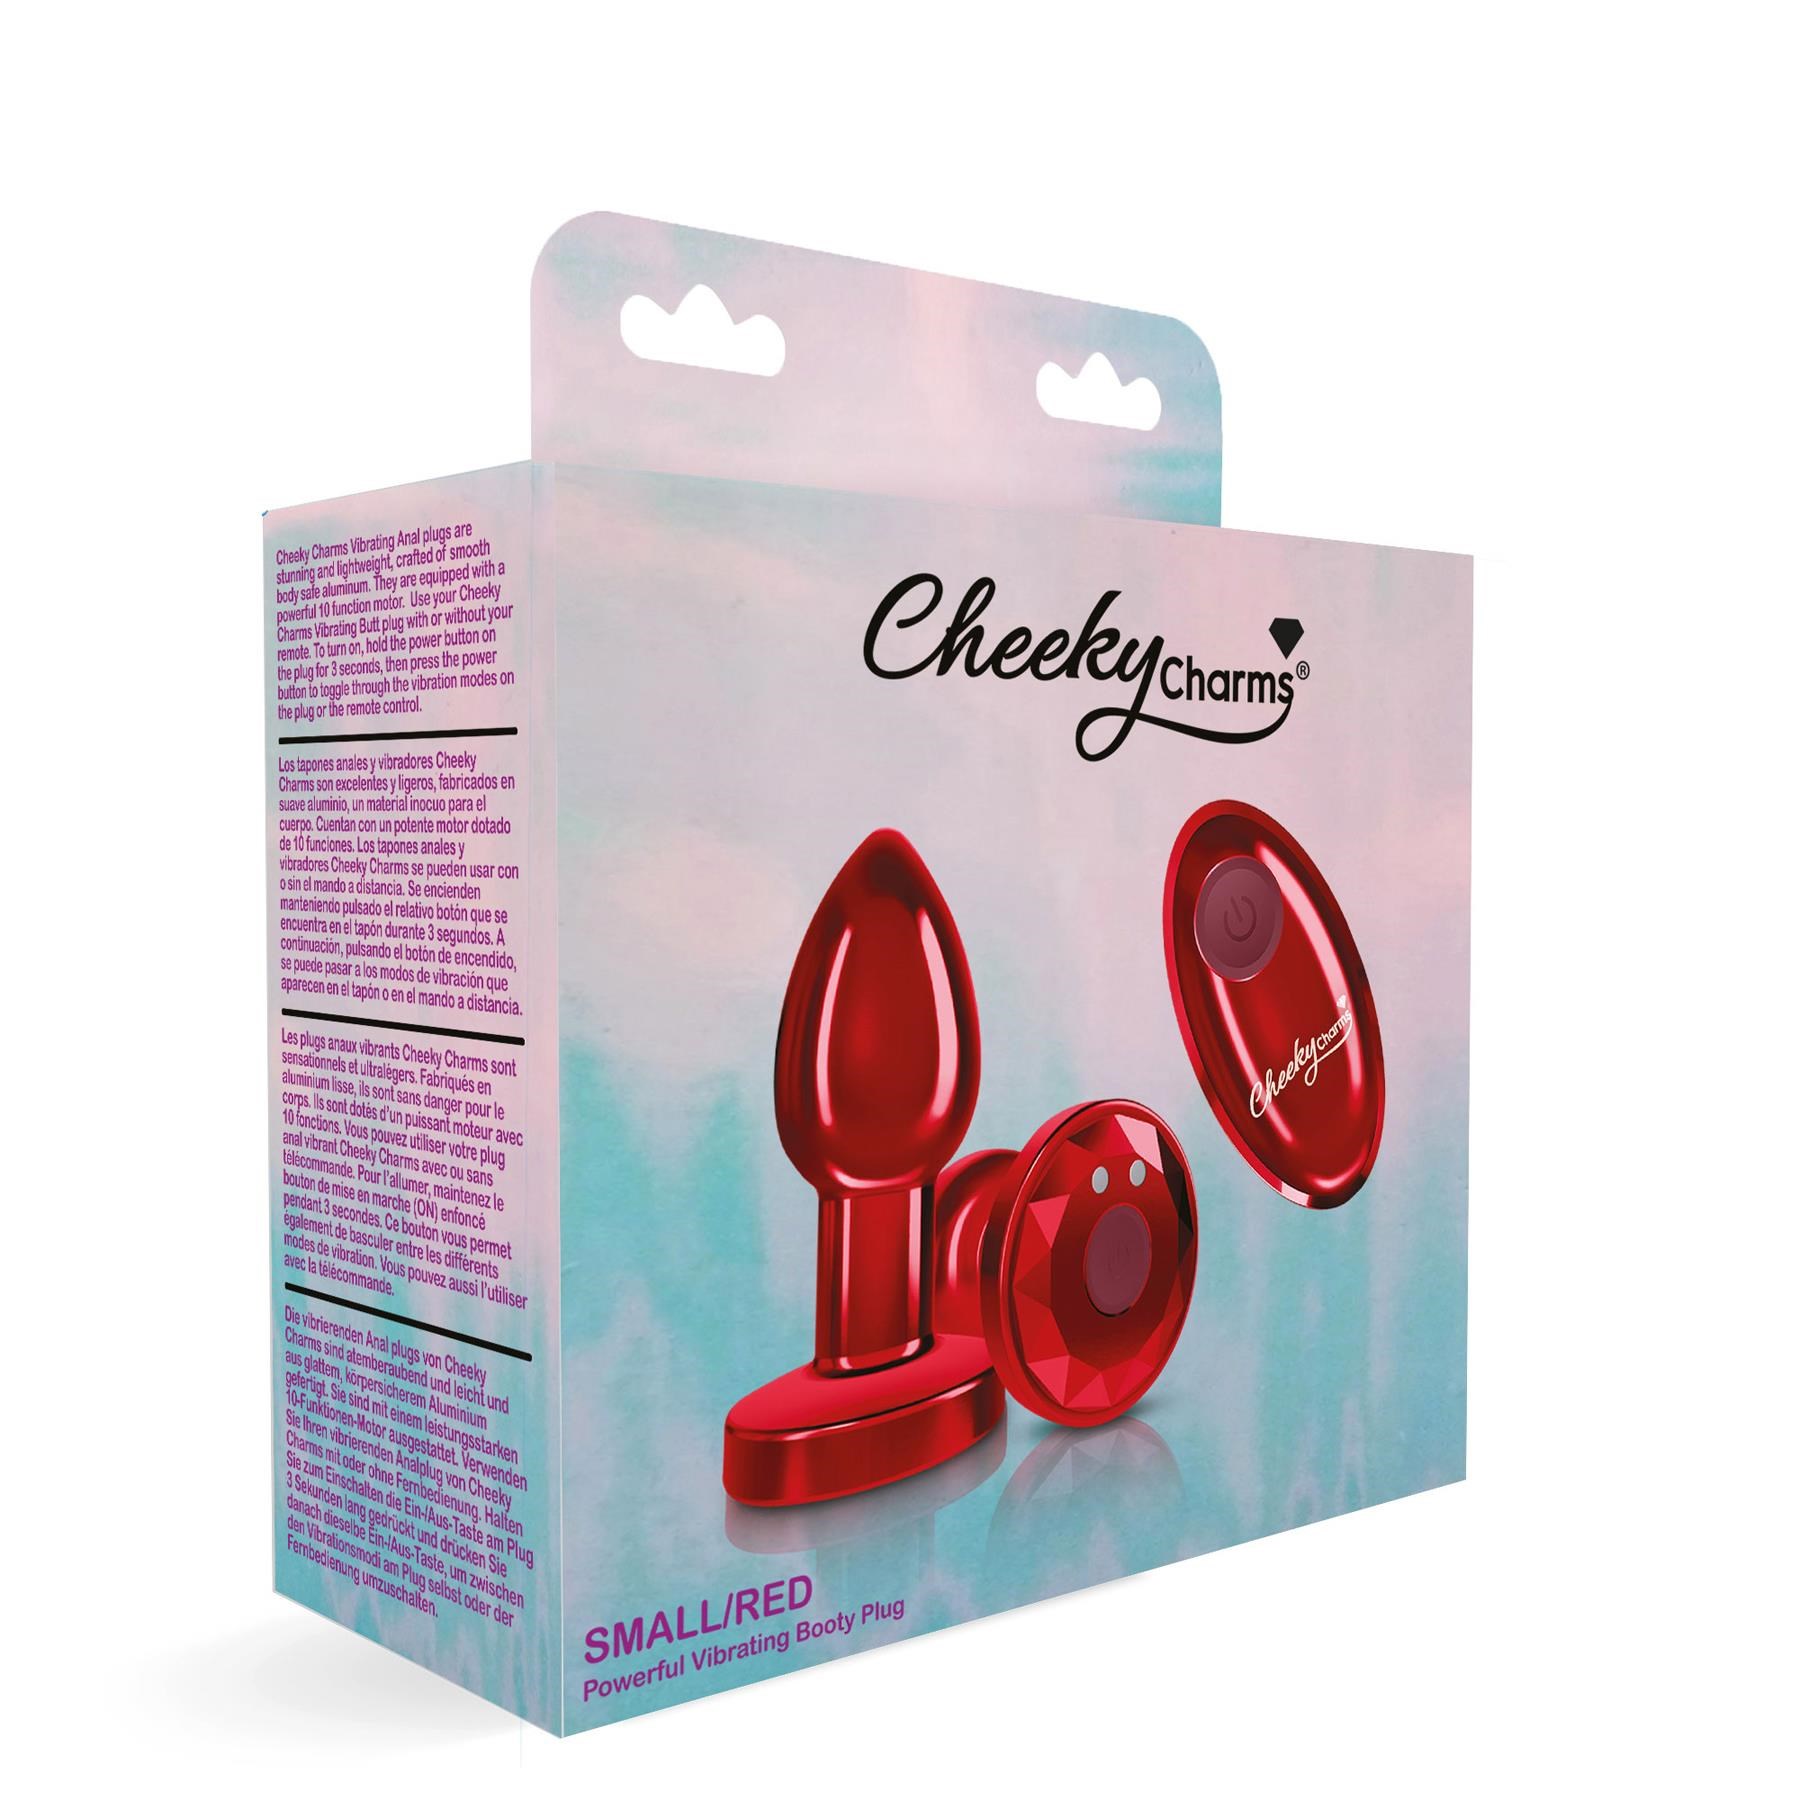 Cheeky Charms Remote Control Butt Plug - Packaging